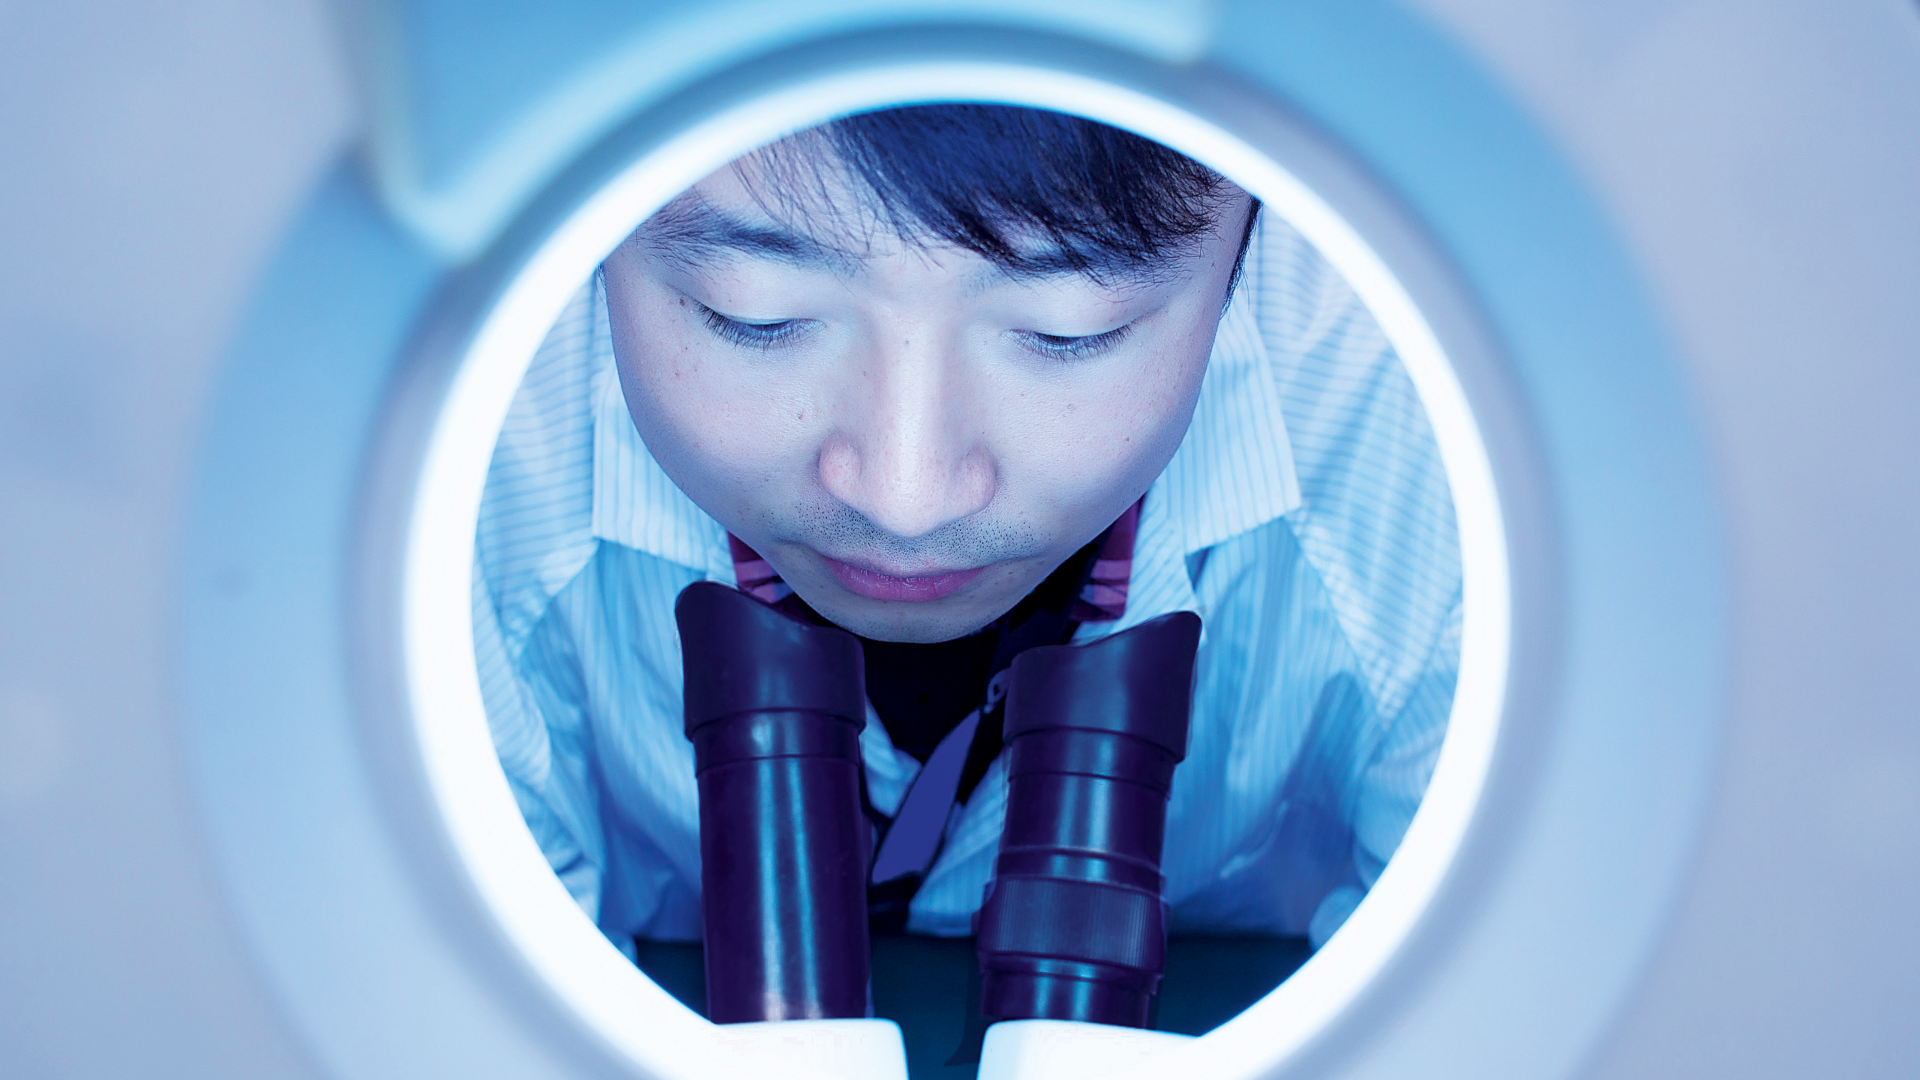 Asian employee looking into a microscope